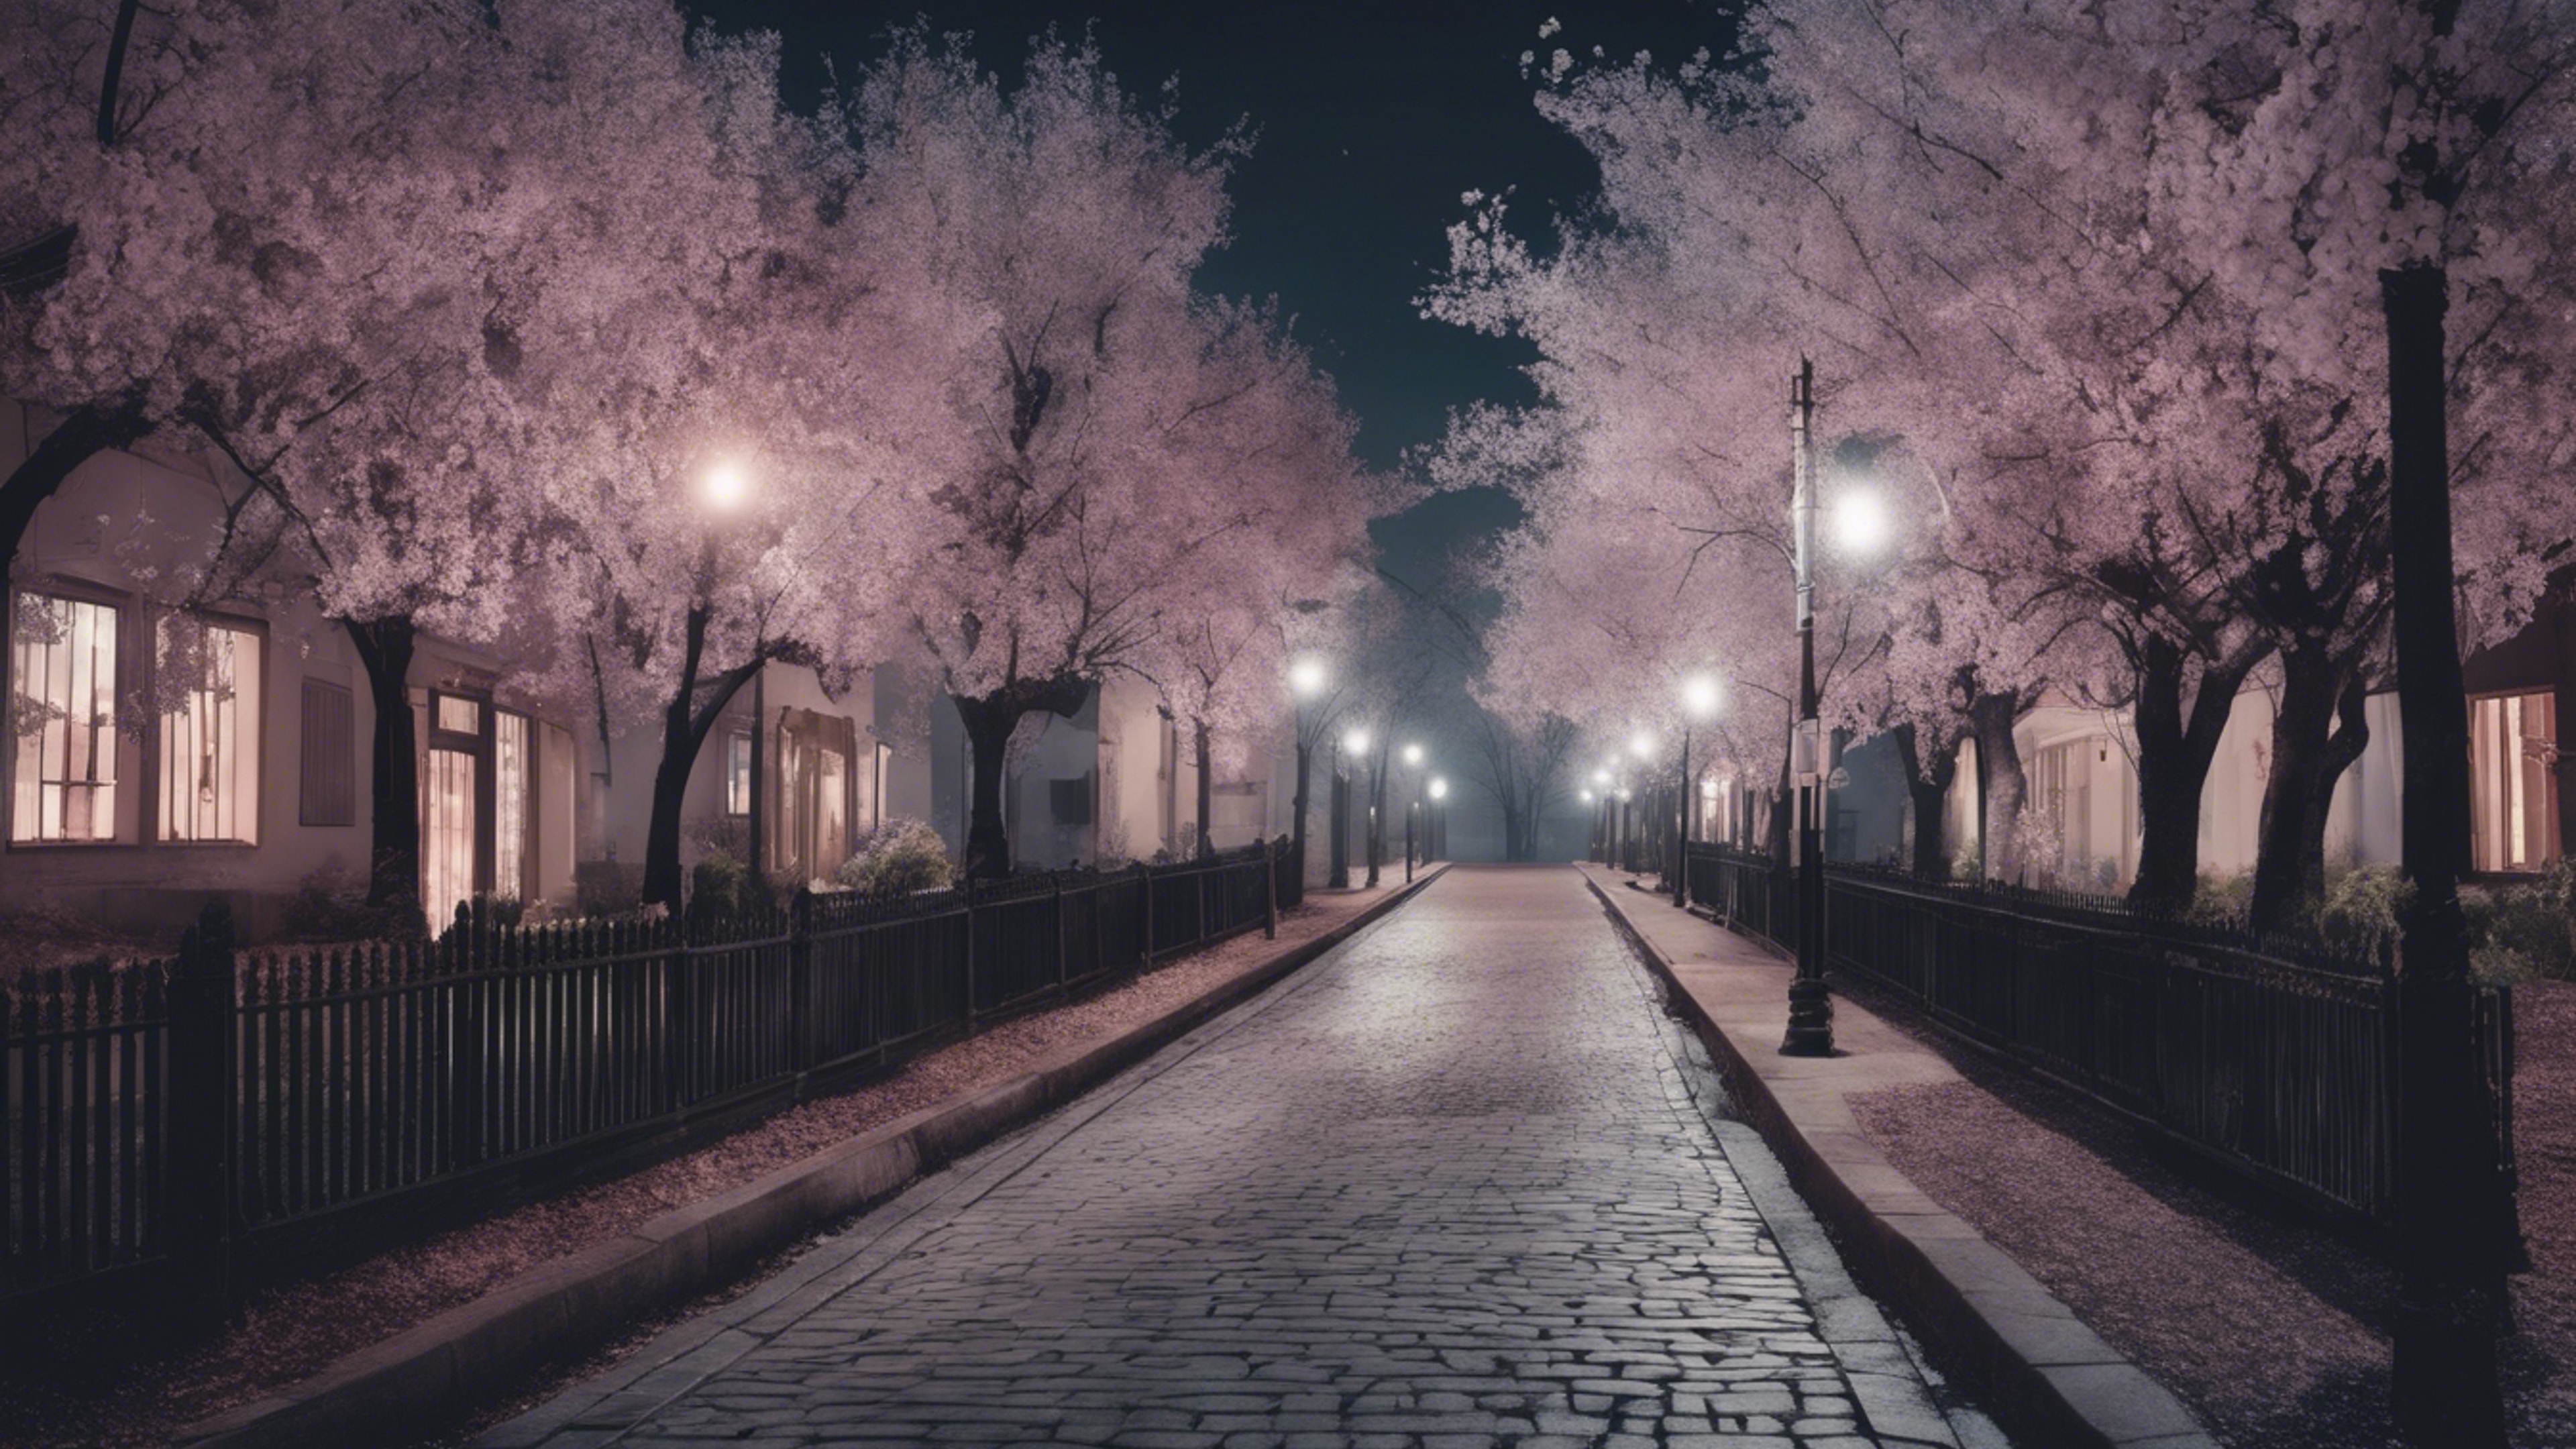 Pastel gothic street lined with black blossom trees under the ghostly night sky. Tapeta[dc1e1b7f0a0c4838b6b6]